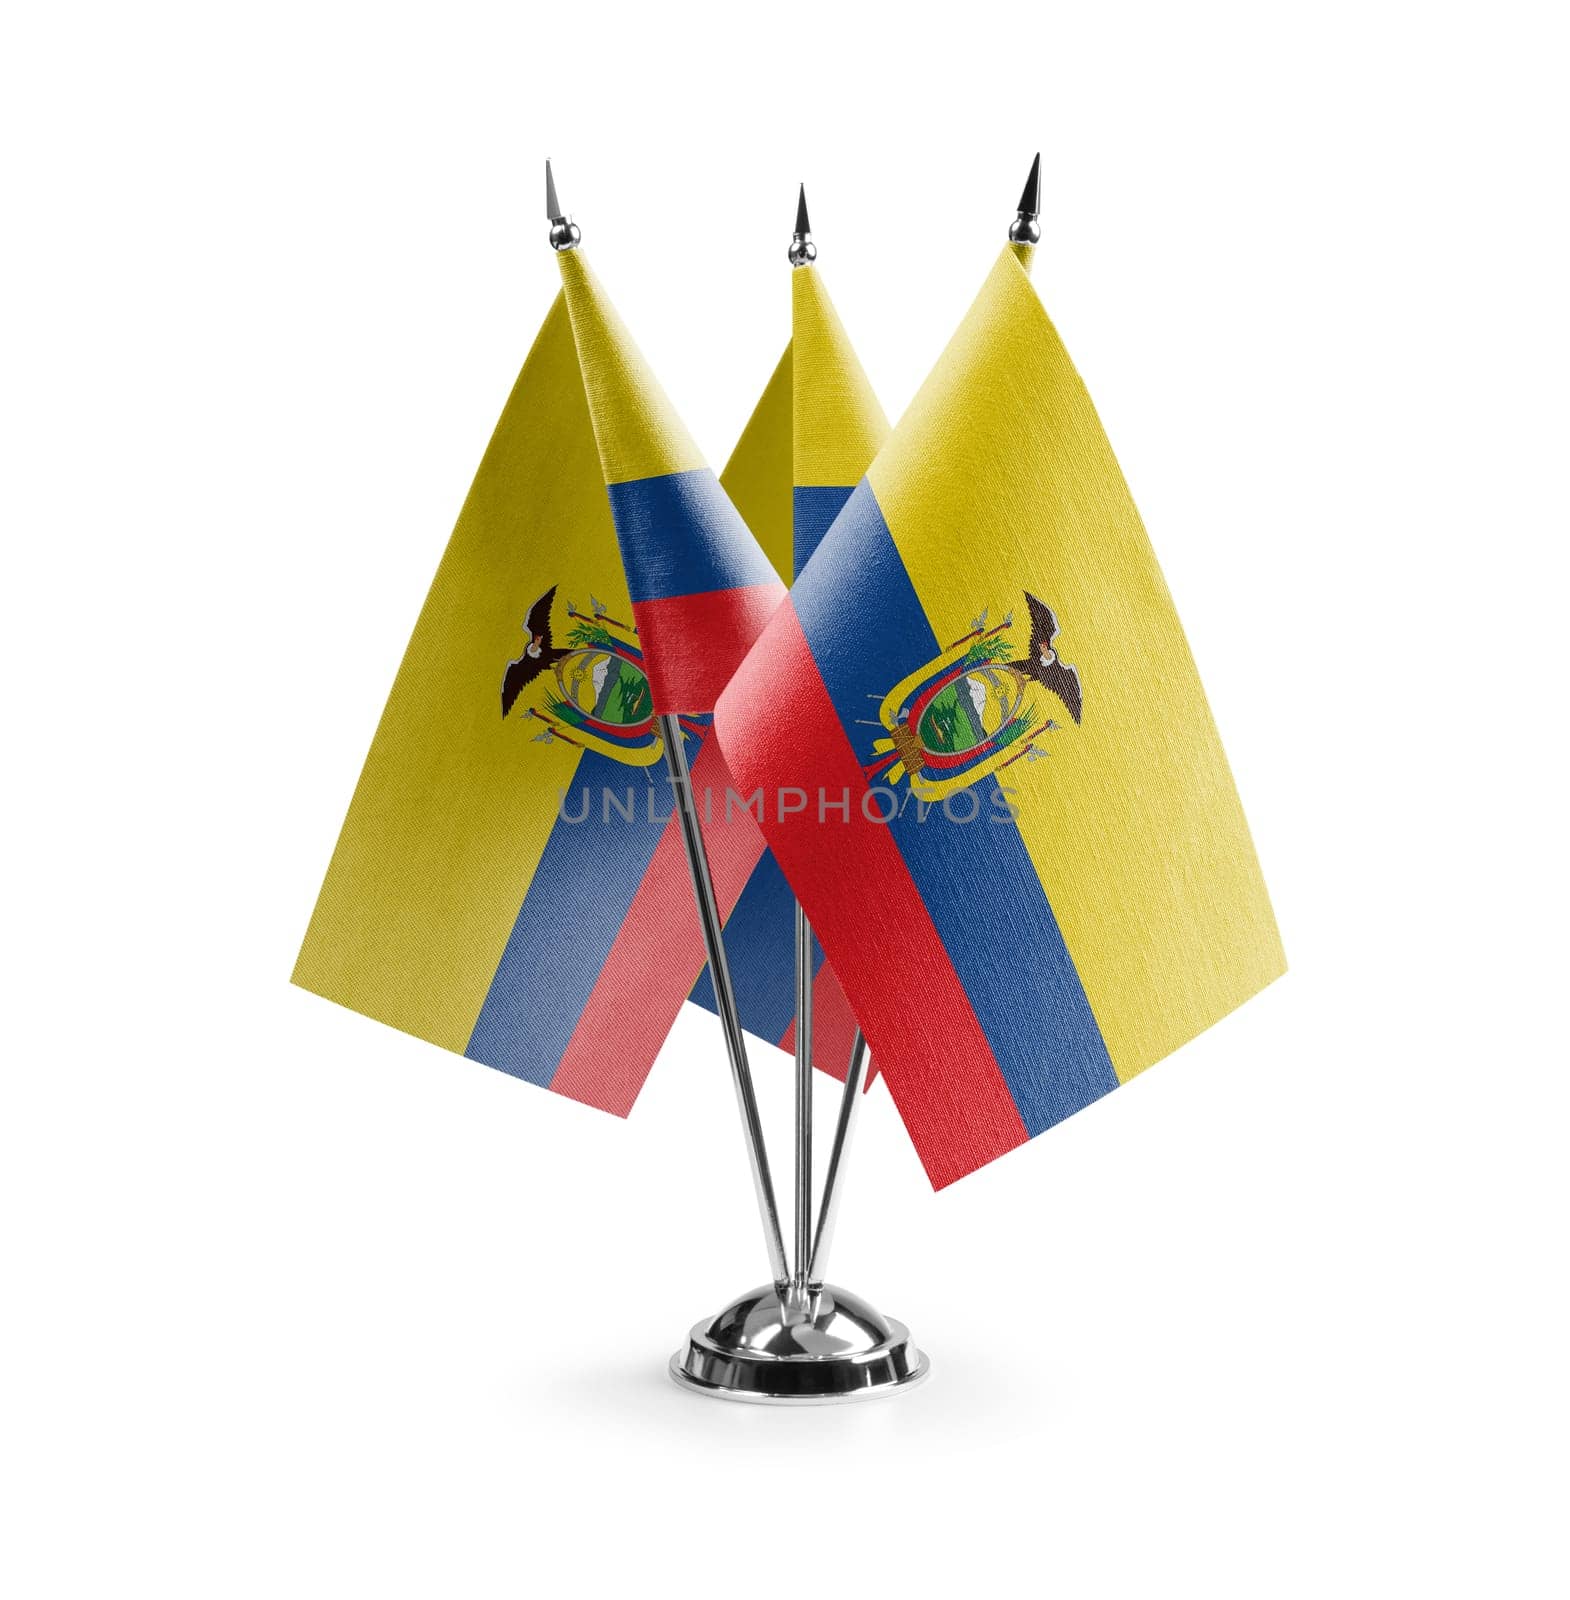 Small national flags of the Ecuador on a white background by butenkow